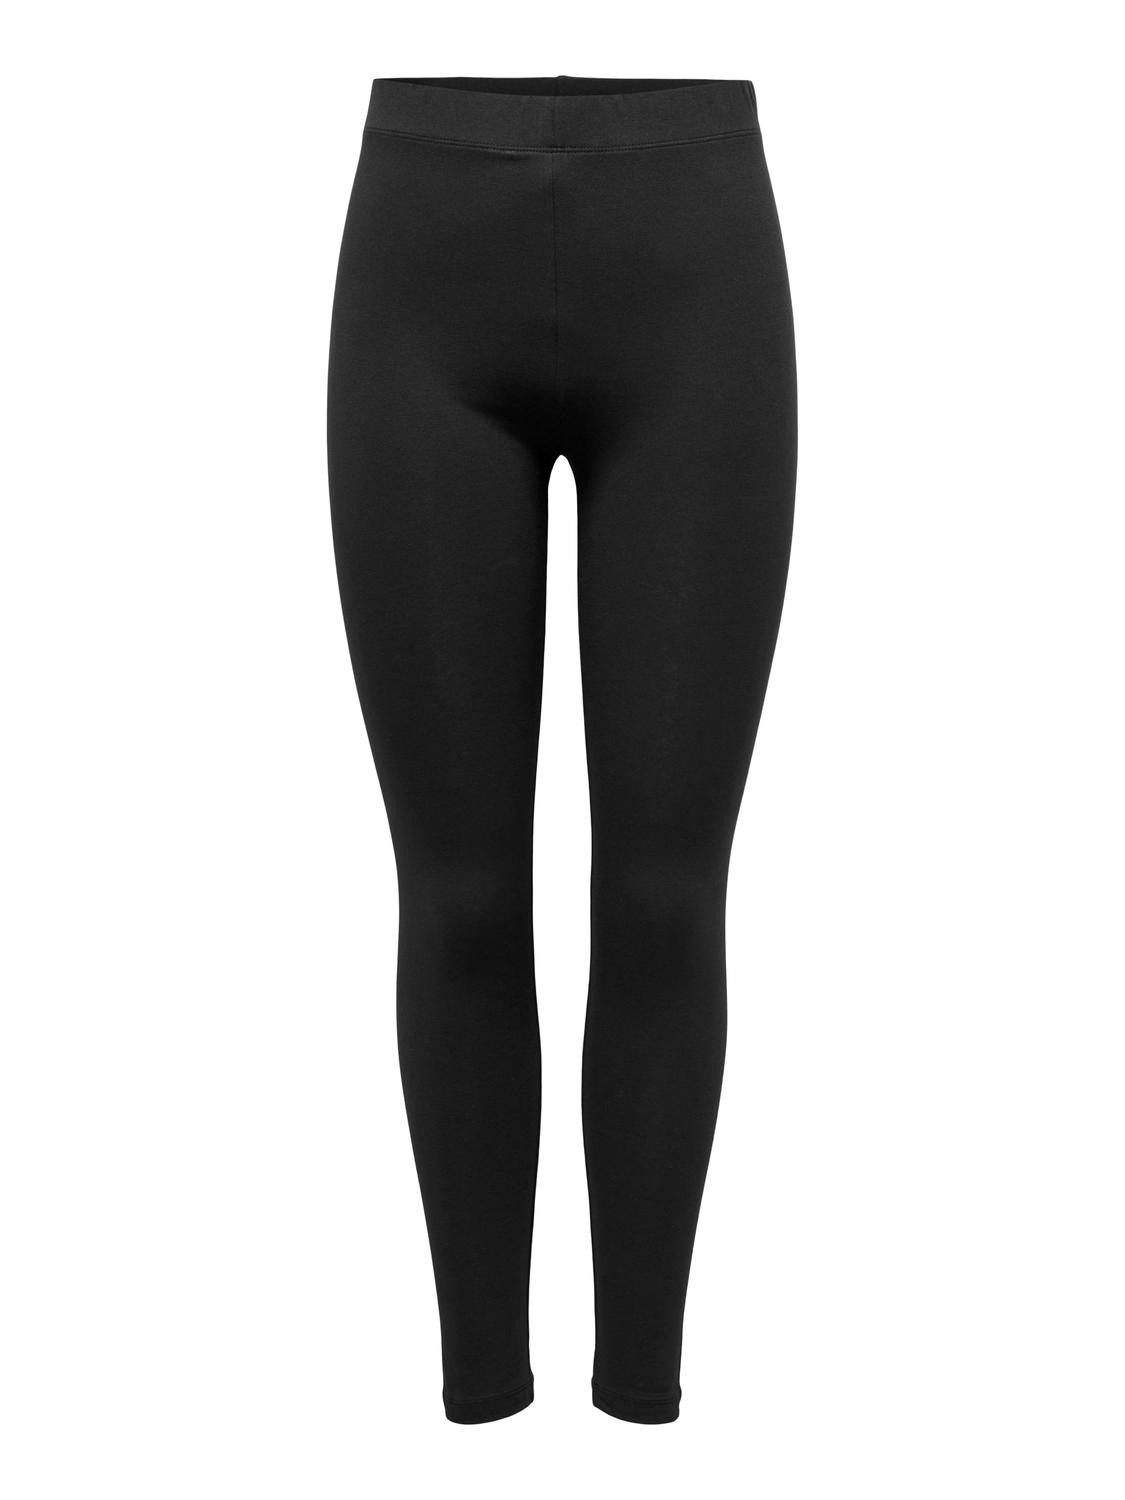 ONLY Tight Fit Mid waist Leggings -Black - 15300690